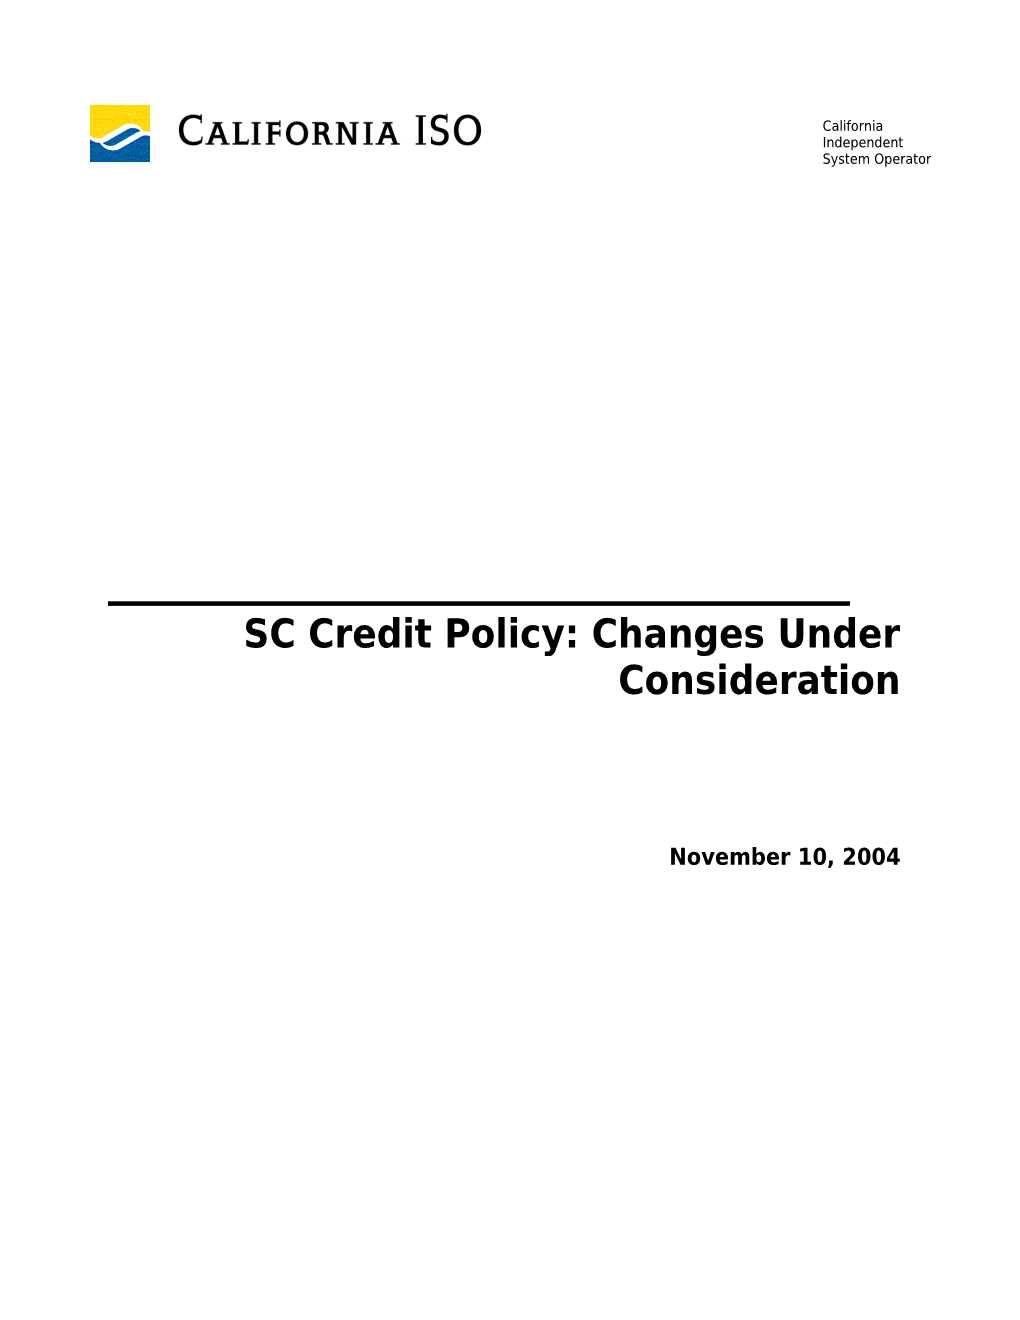 SC Credit Policy: Changes Under Consideration